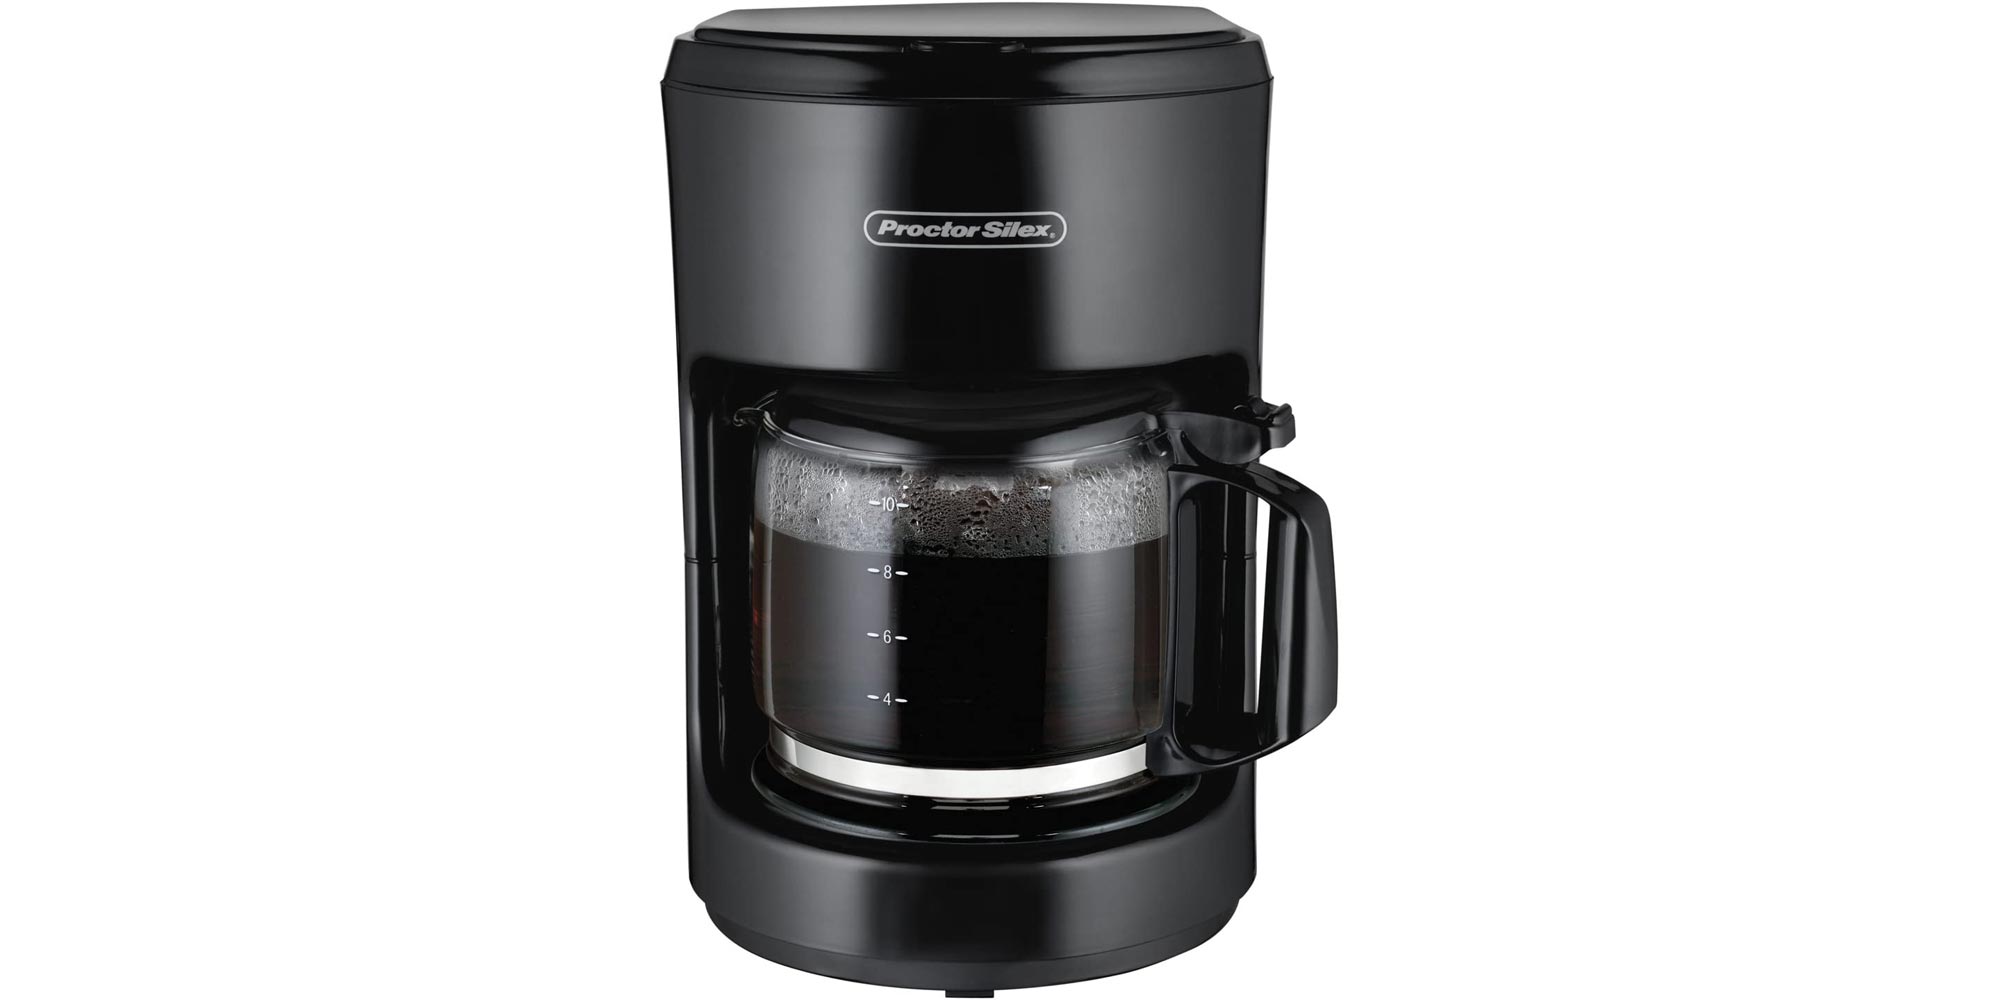 https://9to5toys.com/wp-content/uploads/sites/5/2021/01/proctor-silex-coffee-maker.jpg